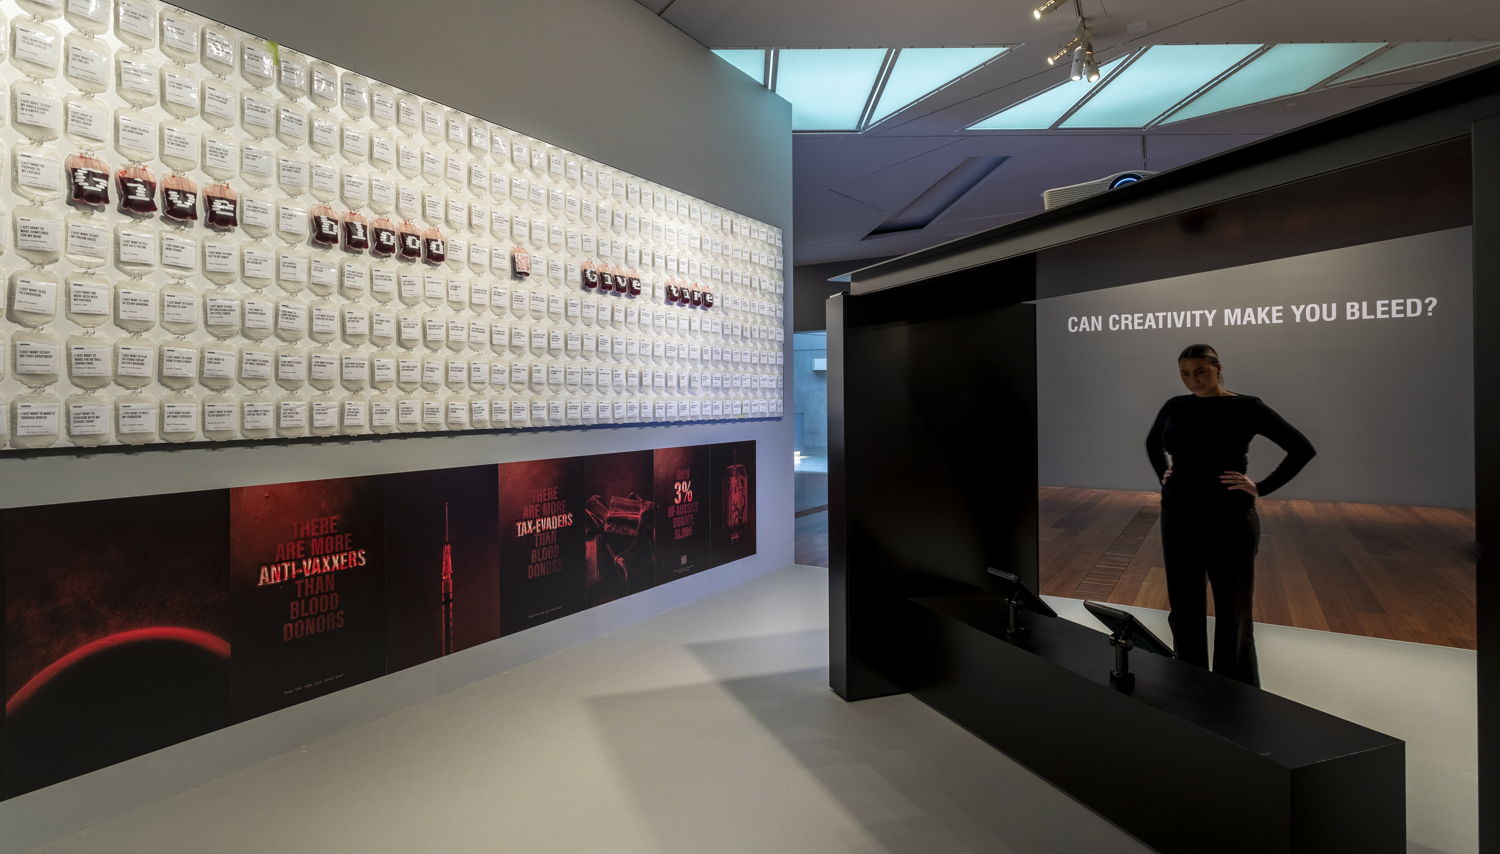 Installation view of Can creativity make you bleed? by Leo Burnett Australia, Melbourne on display in the Rigg Design Prize 2022 at The Ian Potter Centre: NGV Australia from 7 October 2022 – 29 January 2023. Photo: Tobias Titz